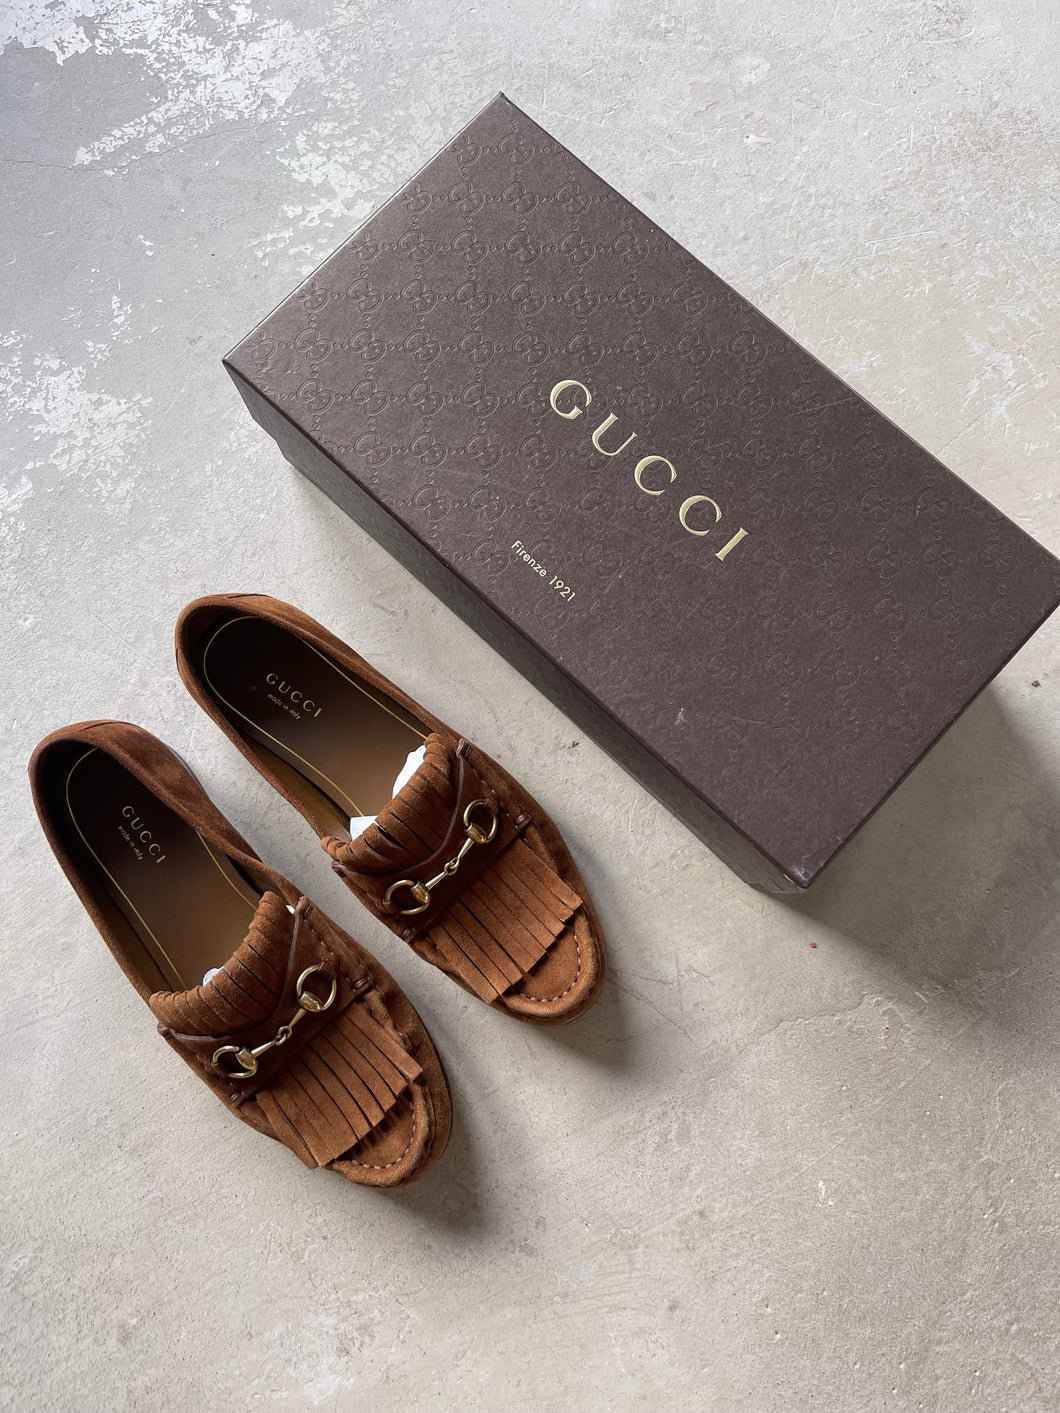 Gucci Suede Loafers - UK 4